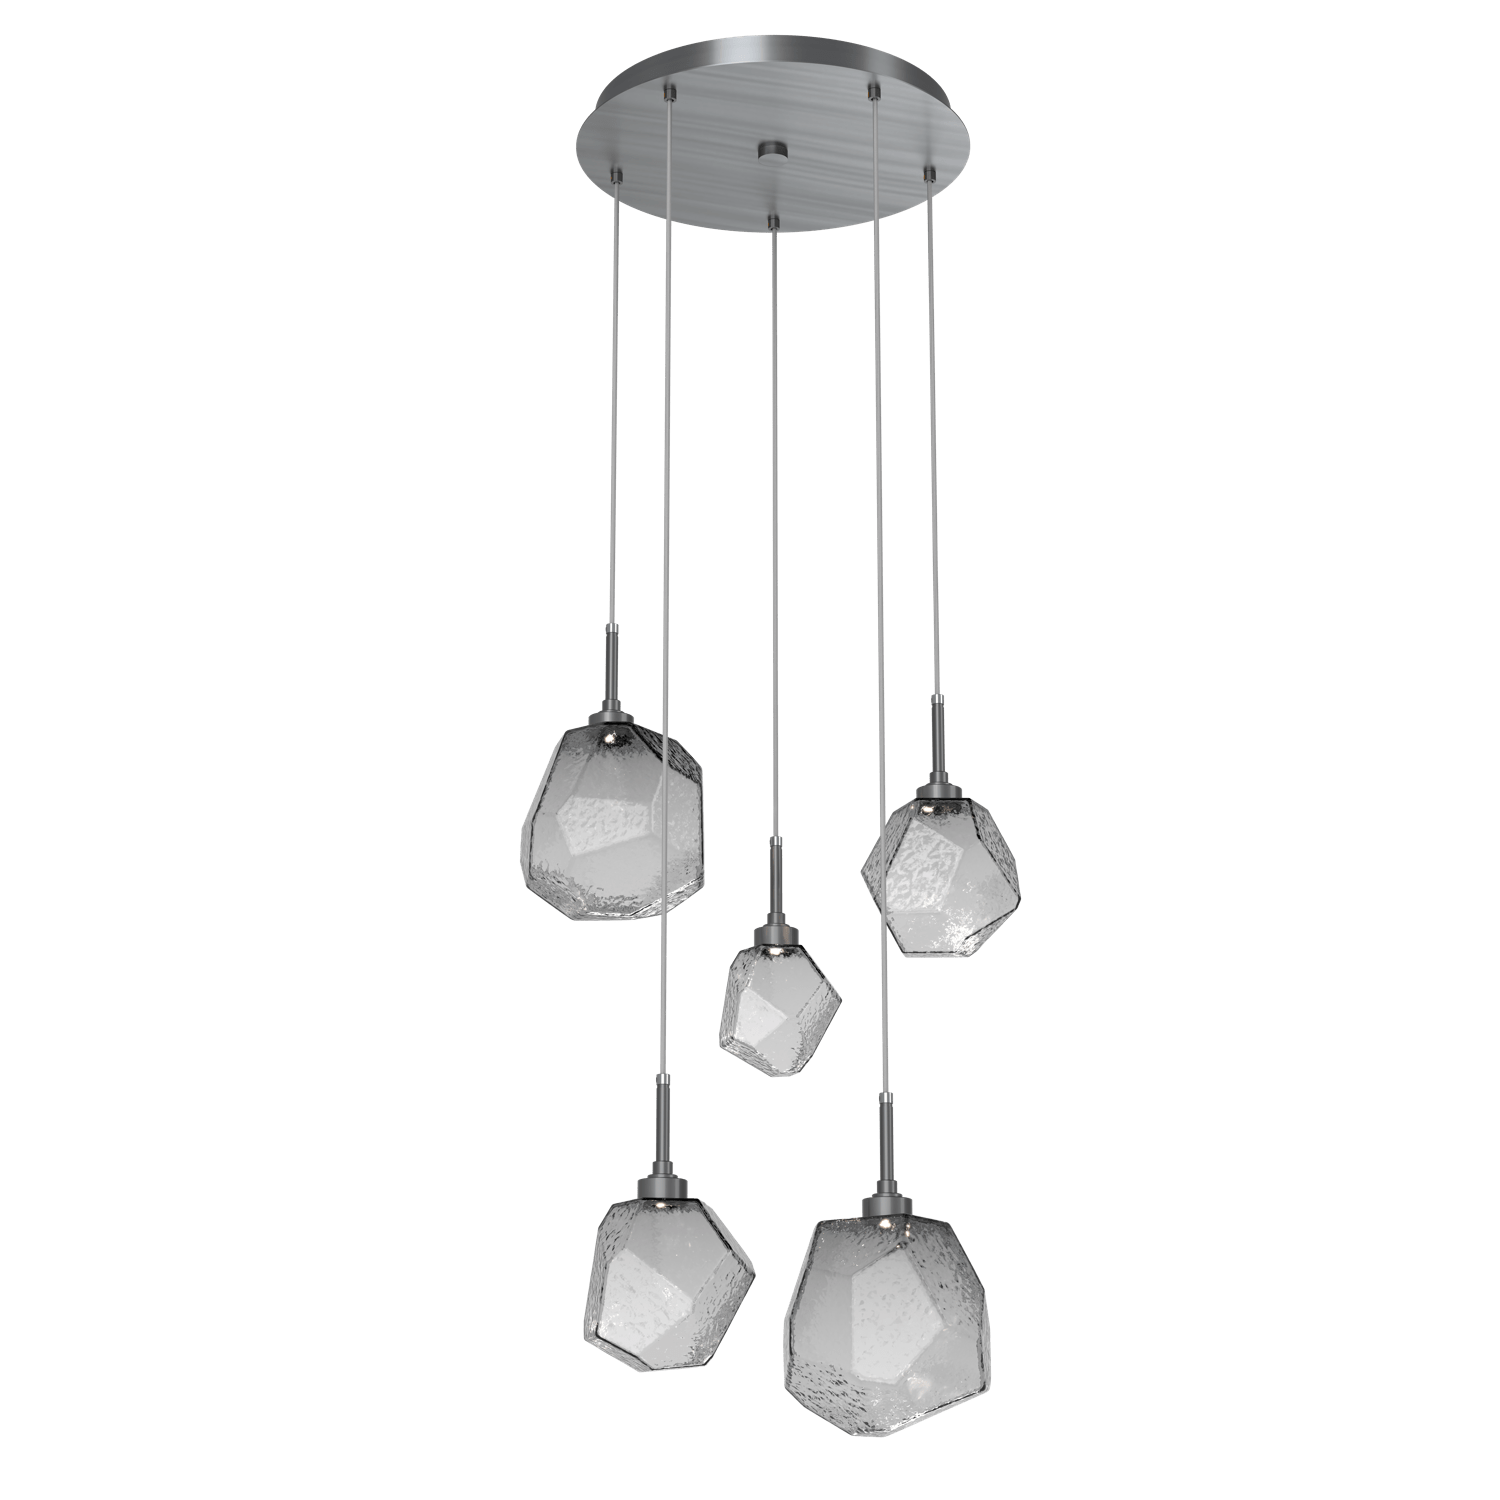 CHB0039-05-GM-S-Hammerton-Studio-Gem-5-light-round-pendant-chandelier-with-gunmetal-finish-and-smoke-blown-glass-shades-and-LED-lamping